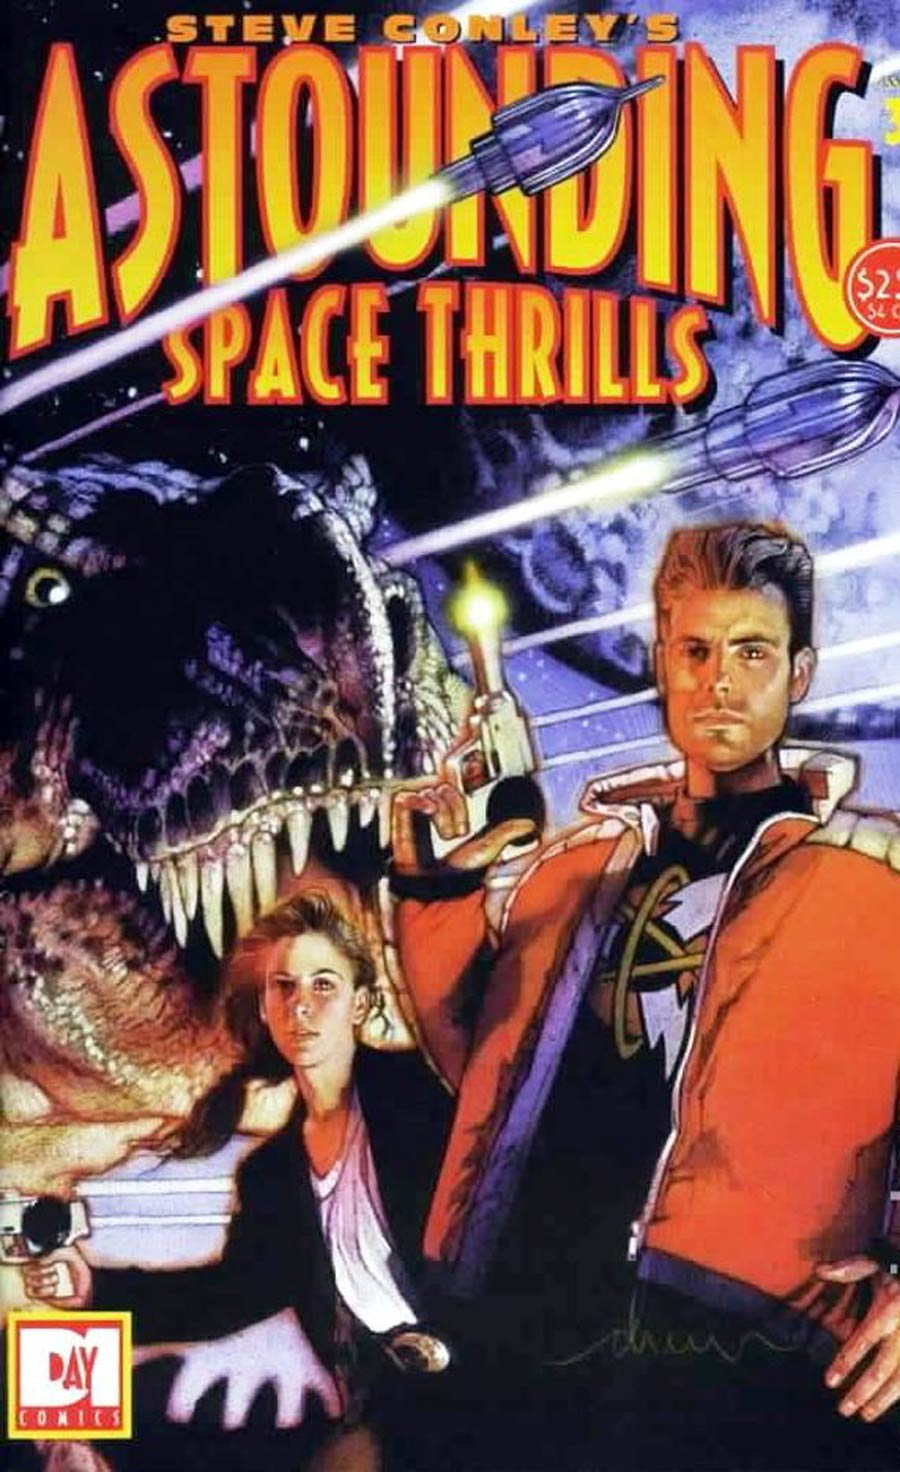 Astounding Space Thrills (1998) #3 Cover A Regular Cover